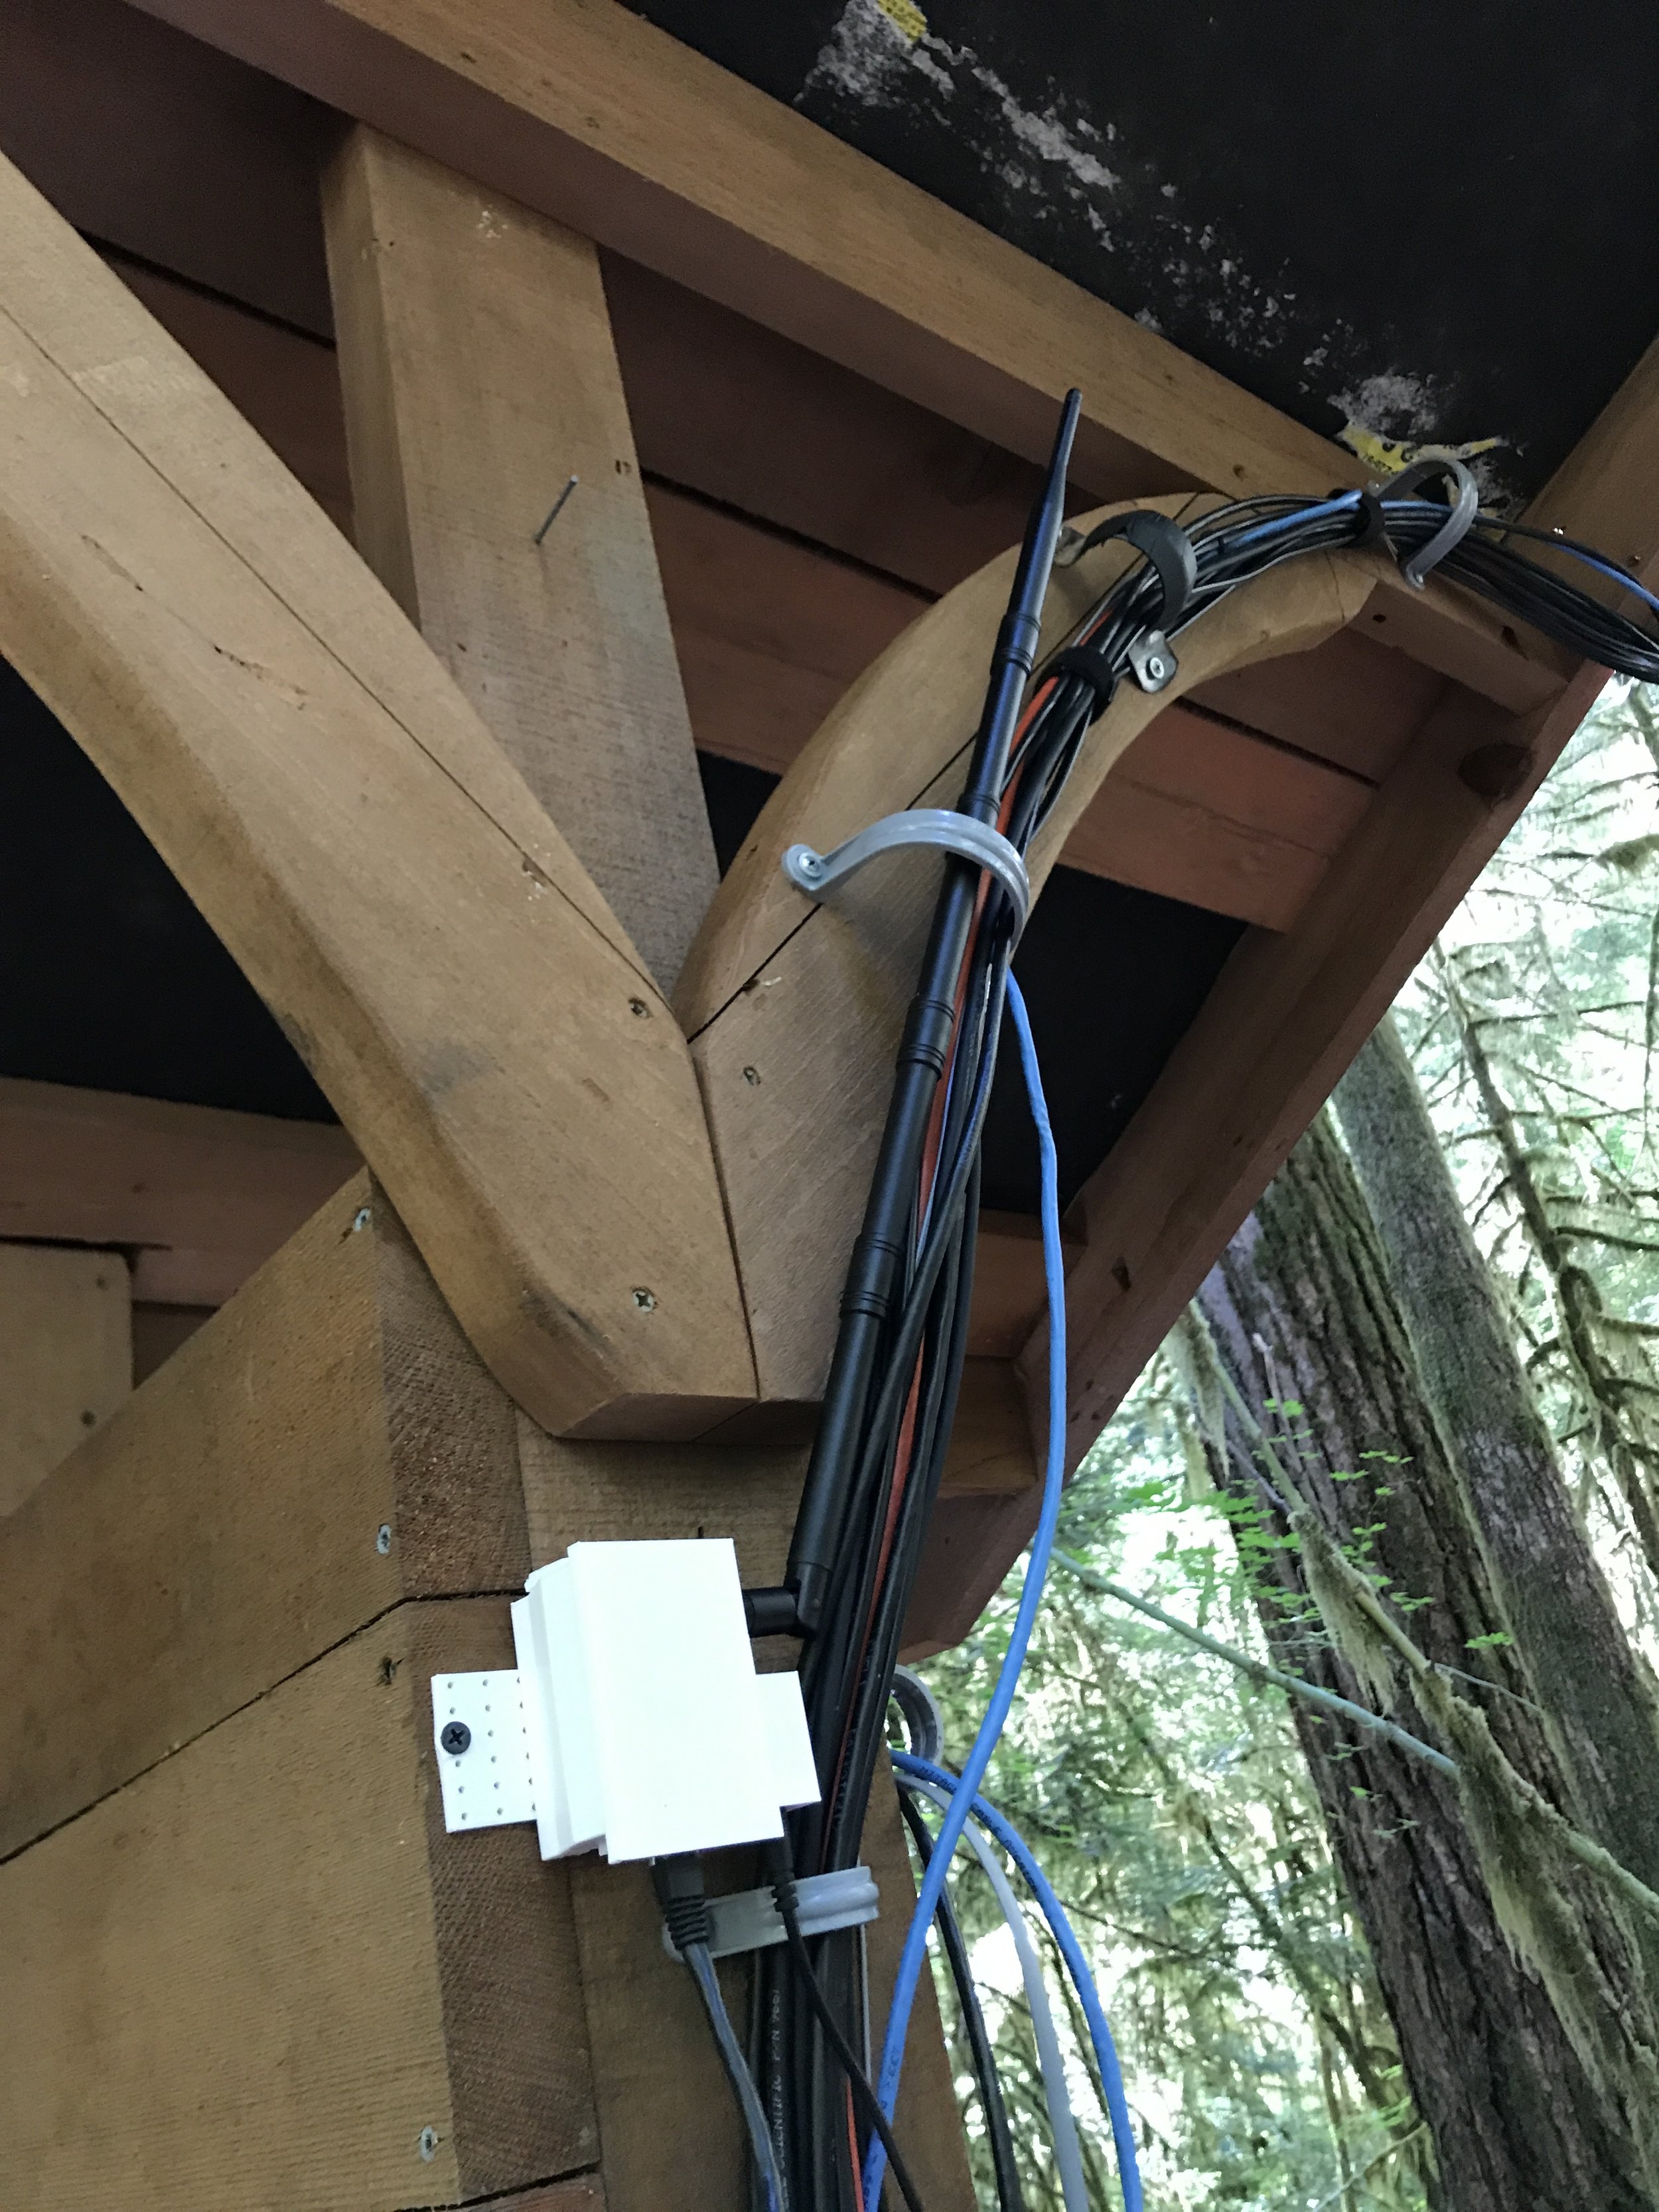 Our receiver hub connected to the power cables on the Discovery Trail weather station, recording transmissions from the Evaporometer.